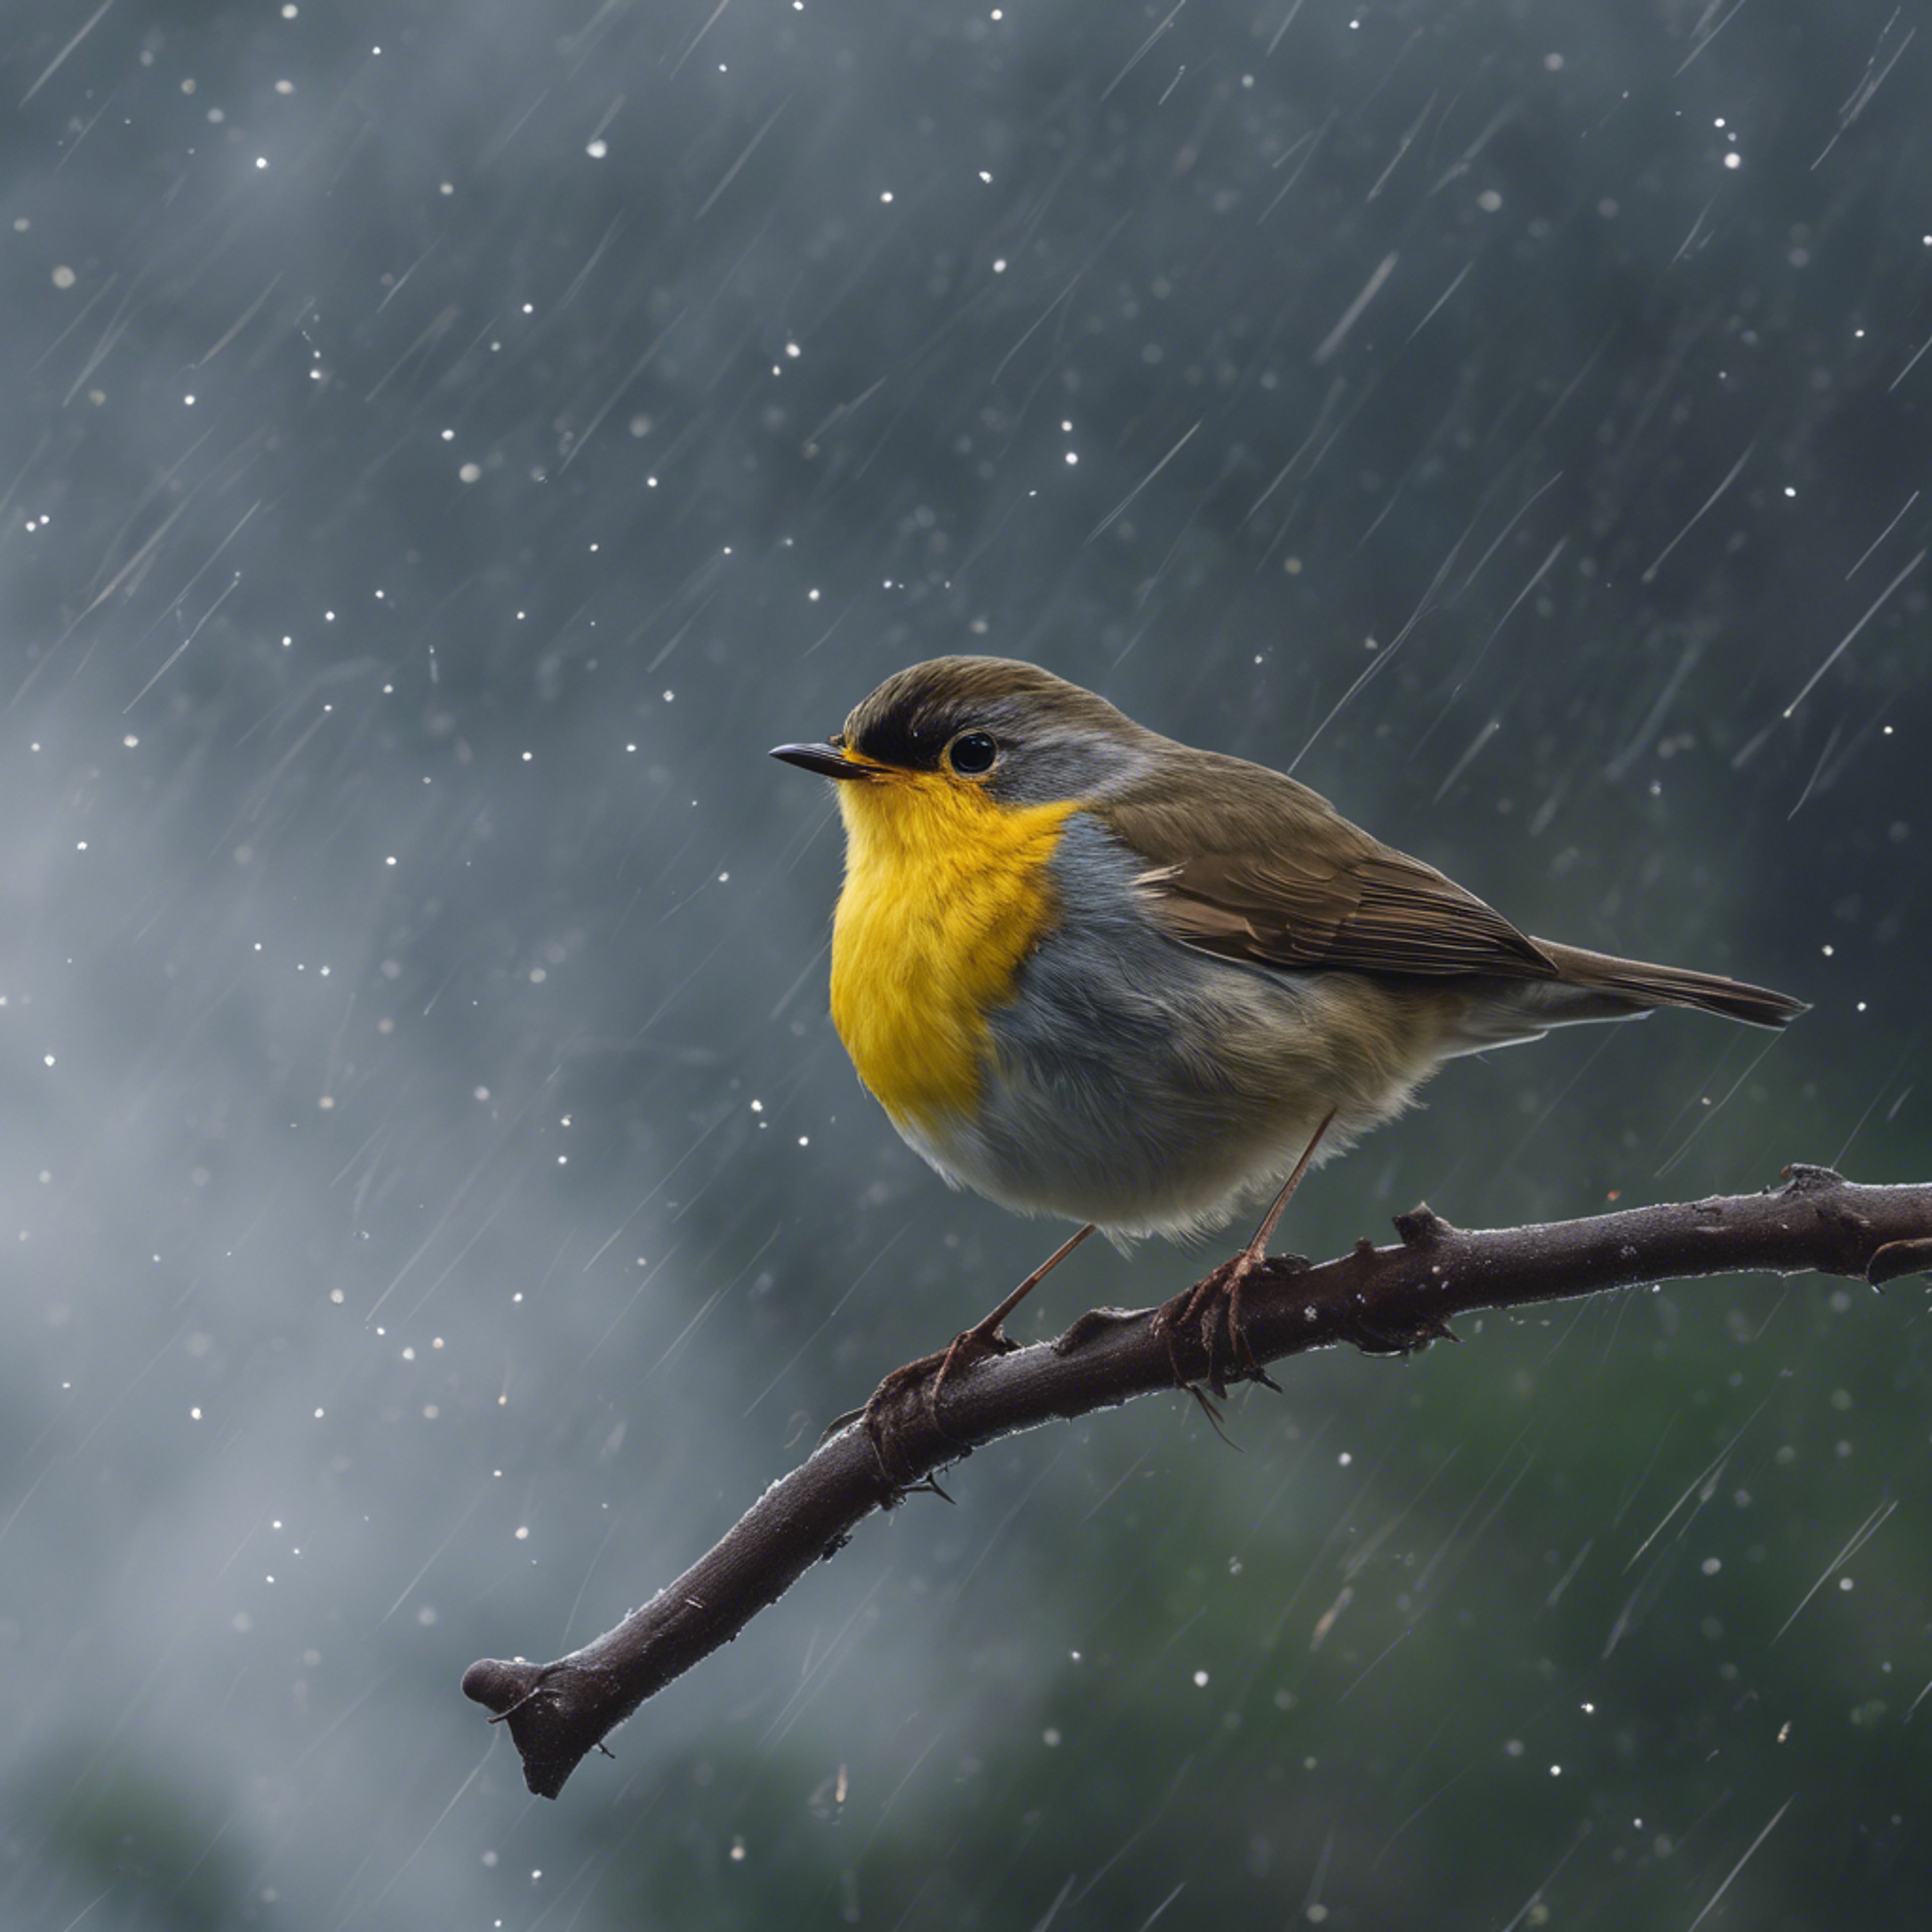 A yellow-breasted robin in mid-flight against a dark, stormy sky. Tapeta[14716aee78274faeac04]